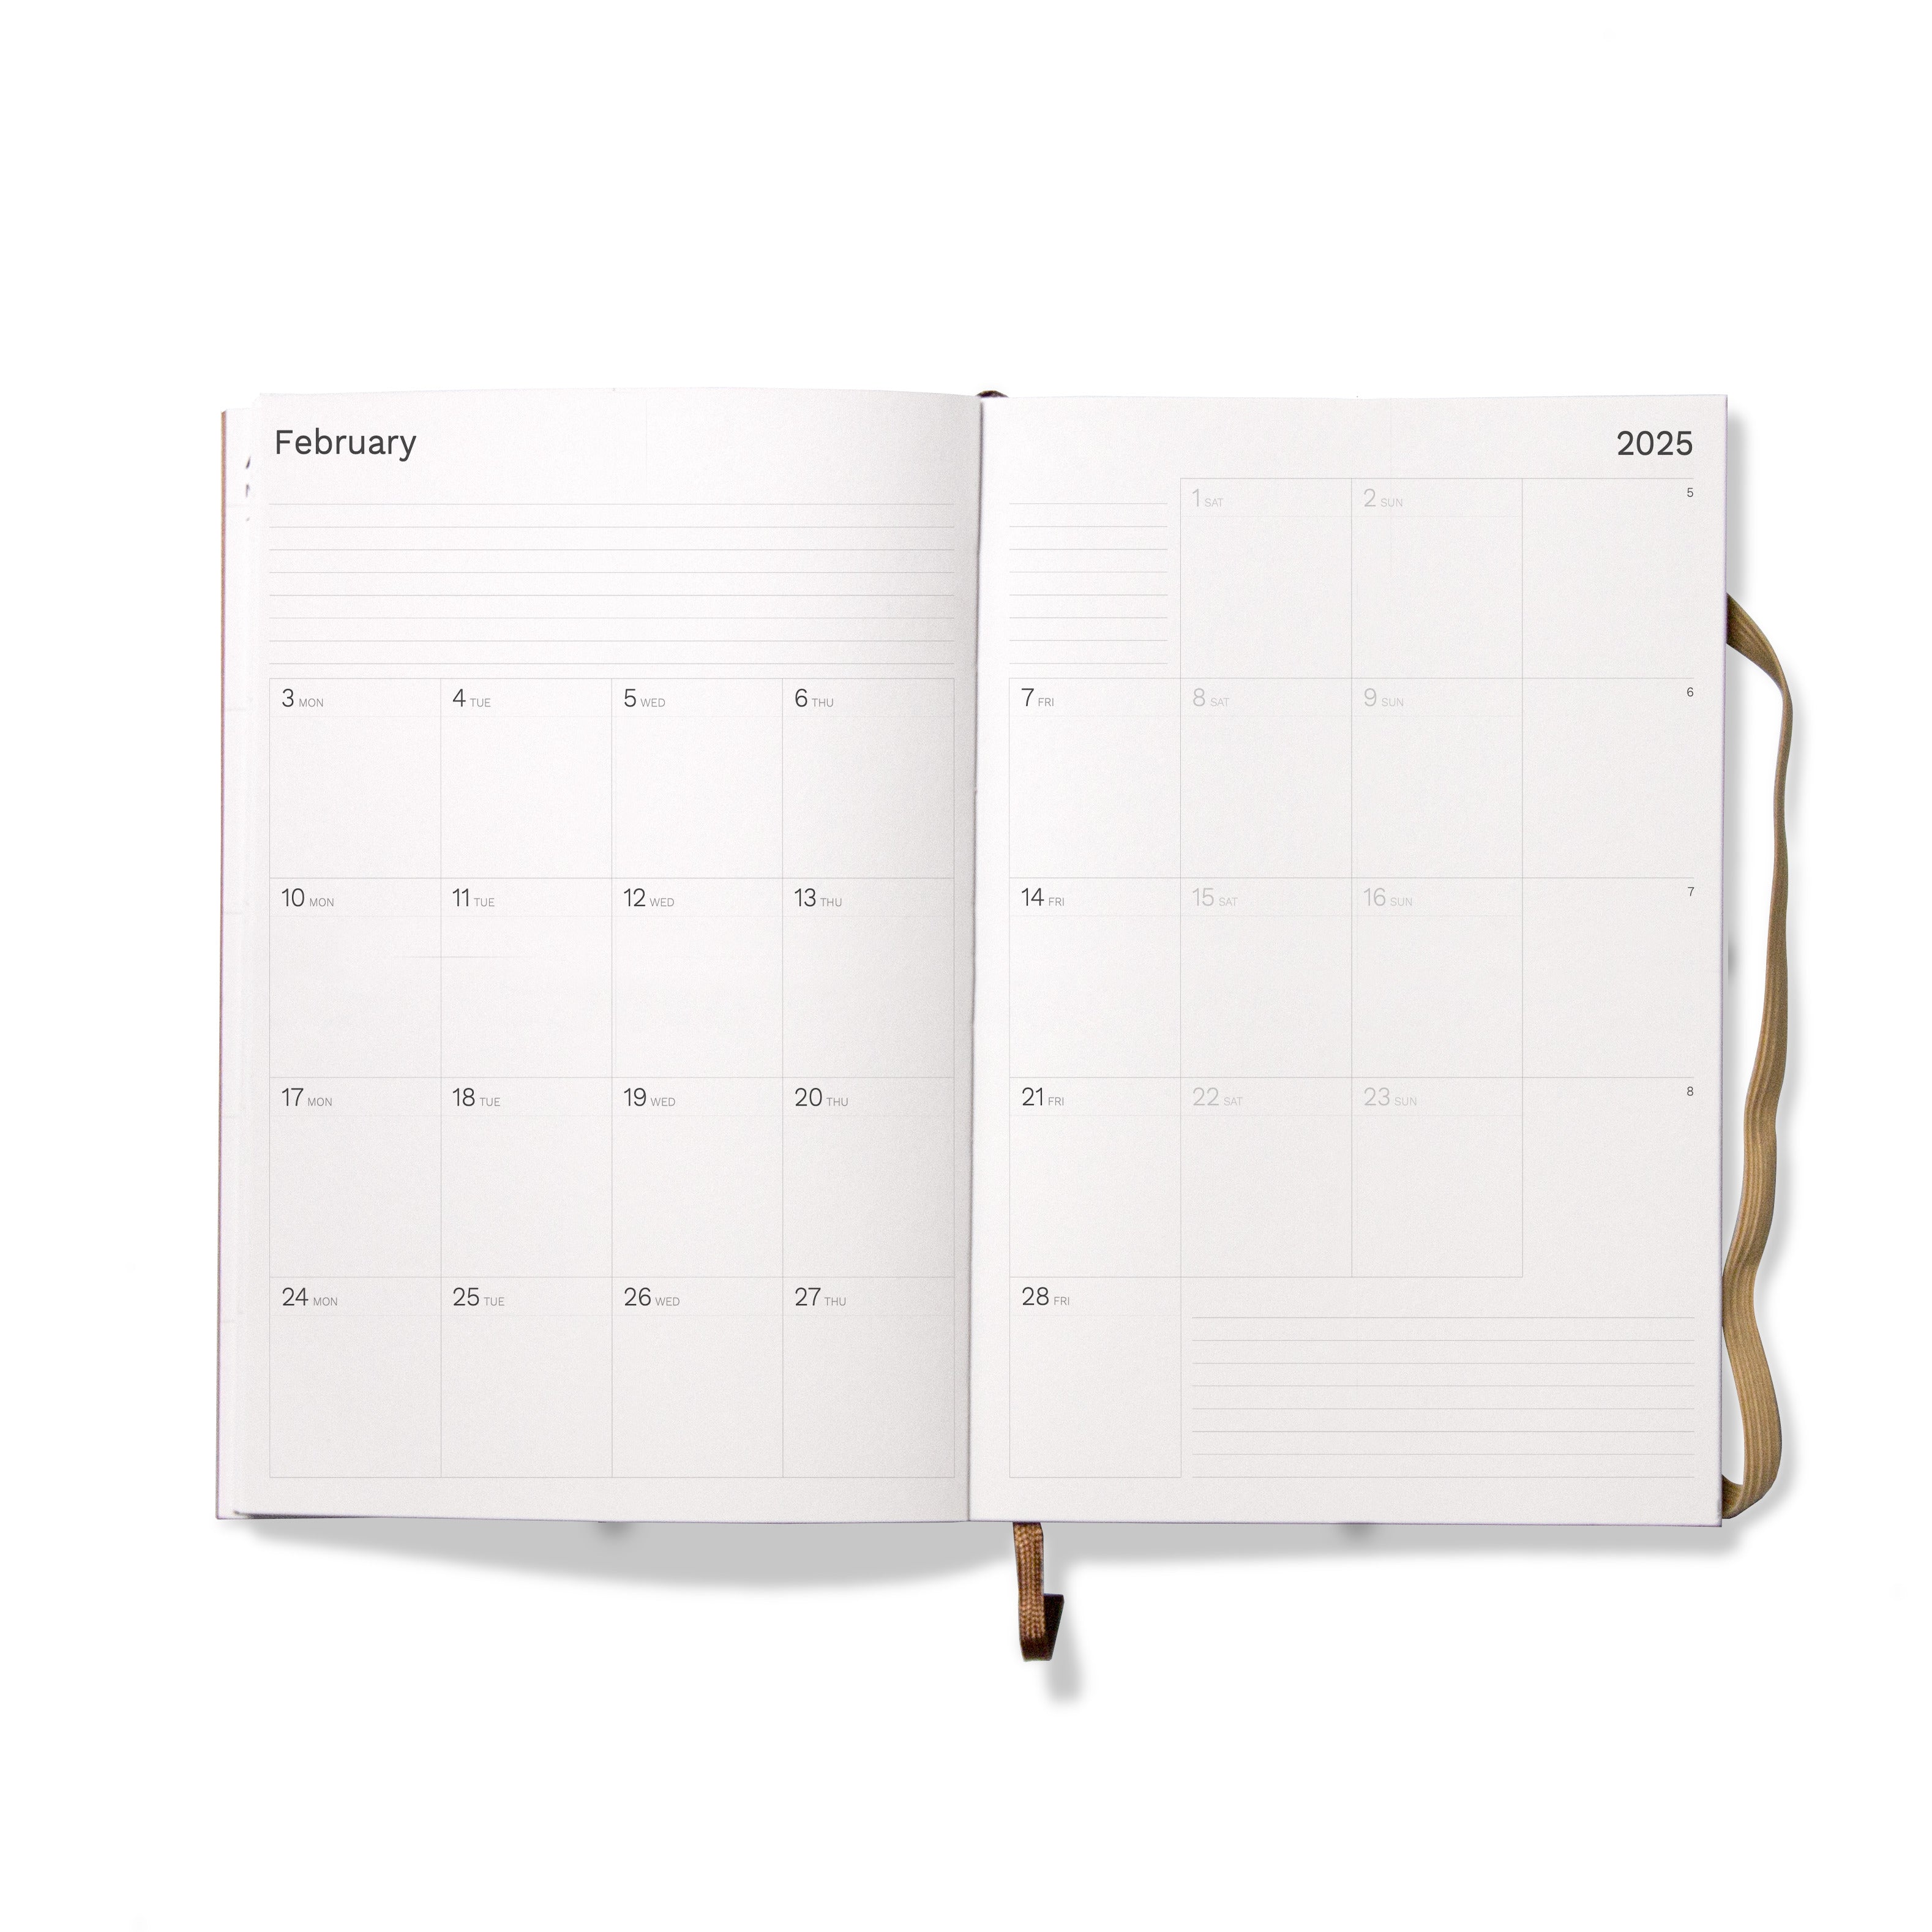 Octàgon Design 2025 Large Weekly Planner A4 size, monthly template